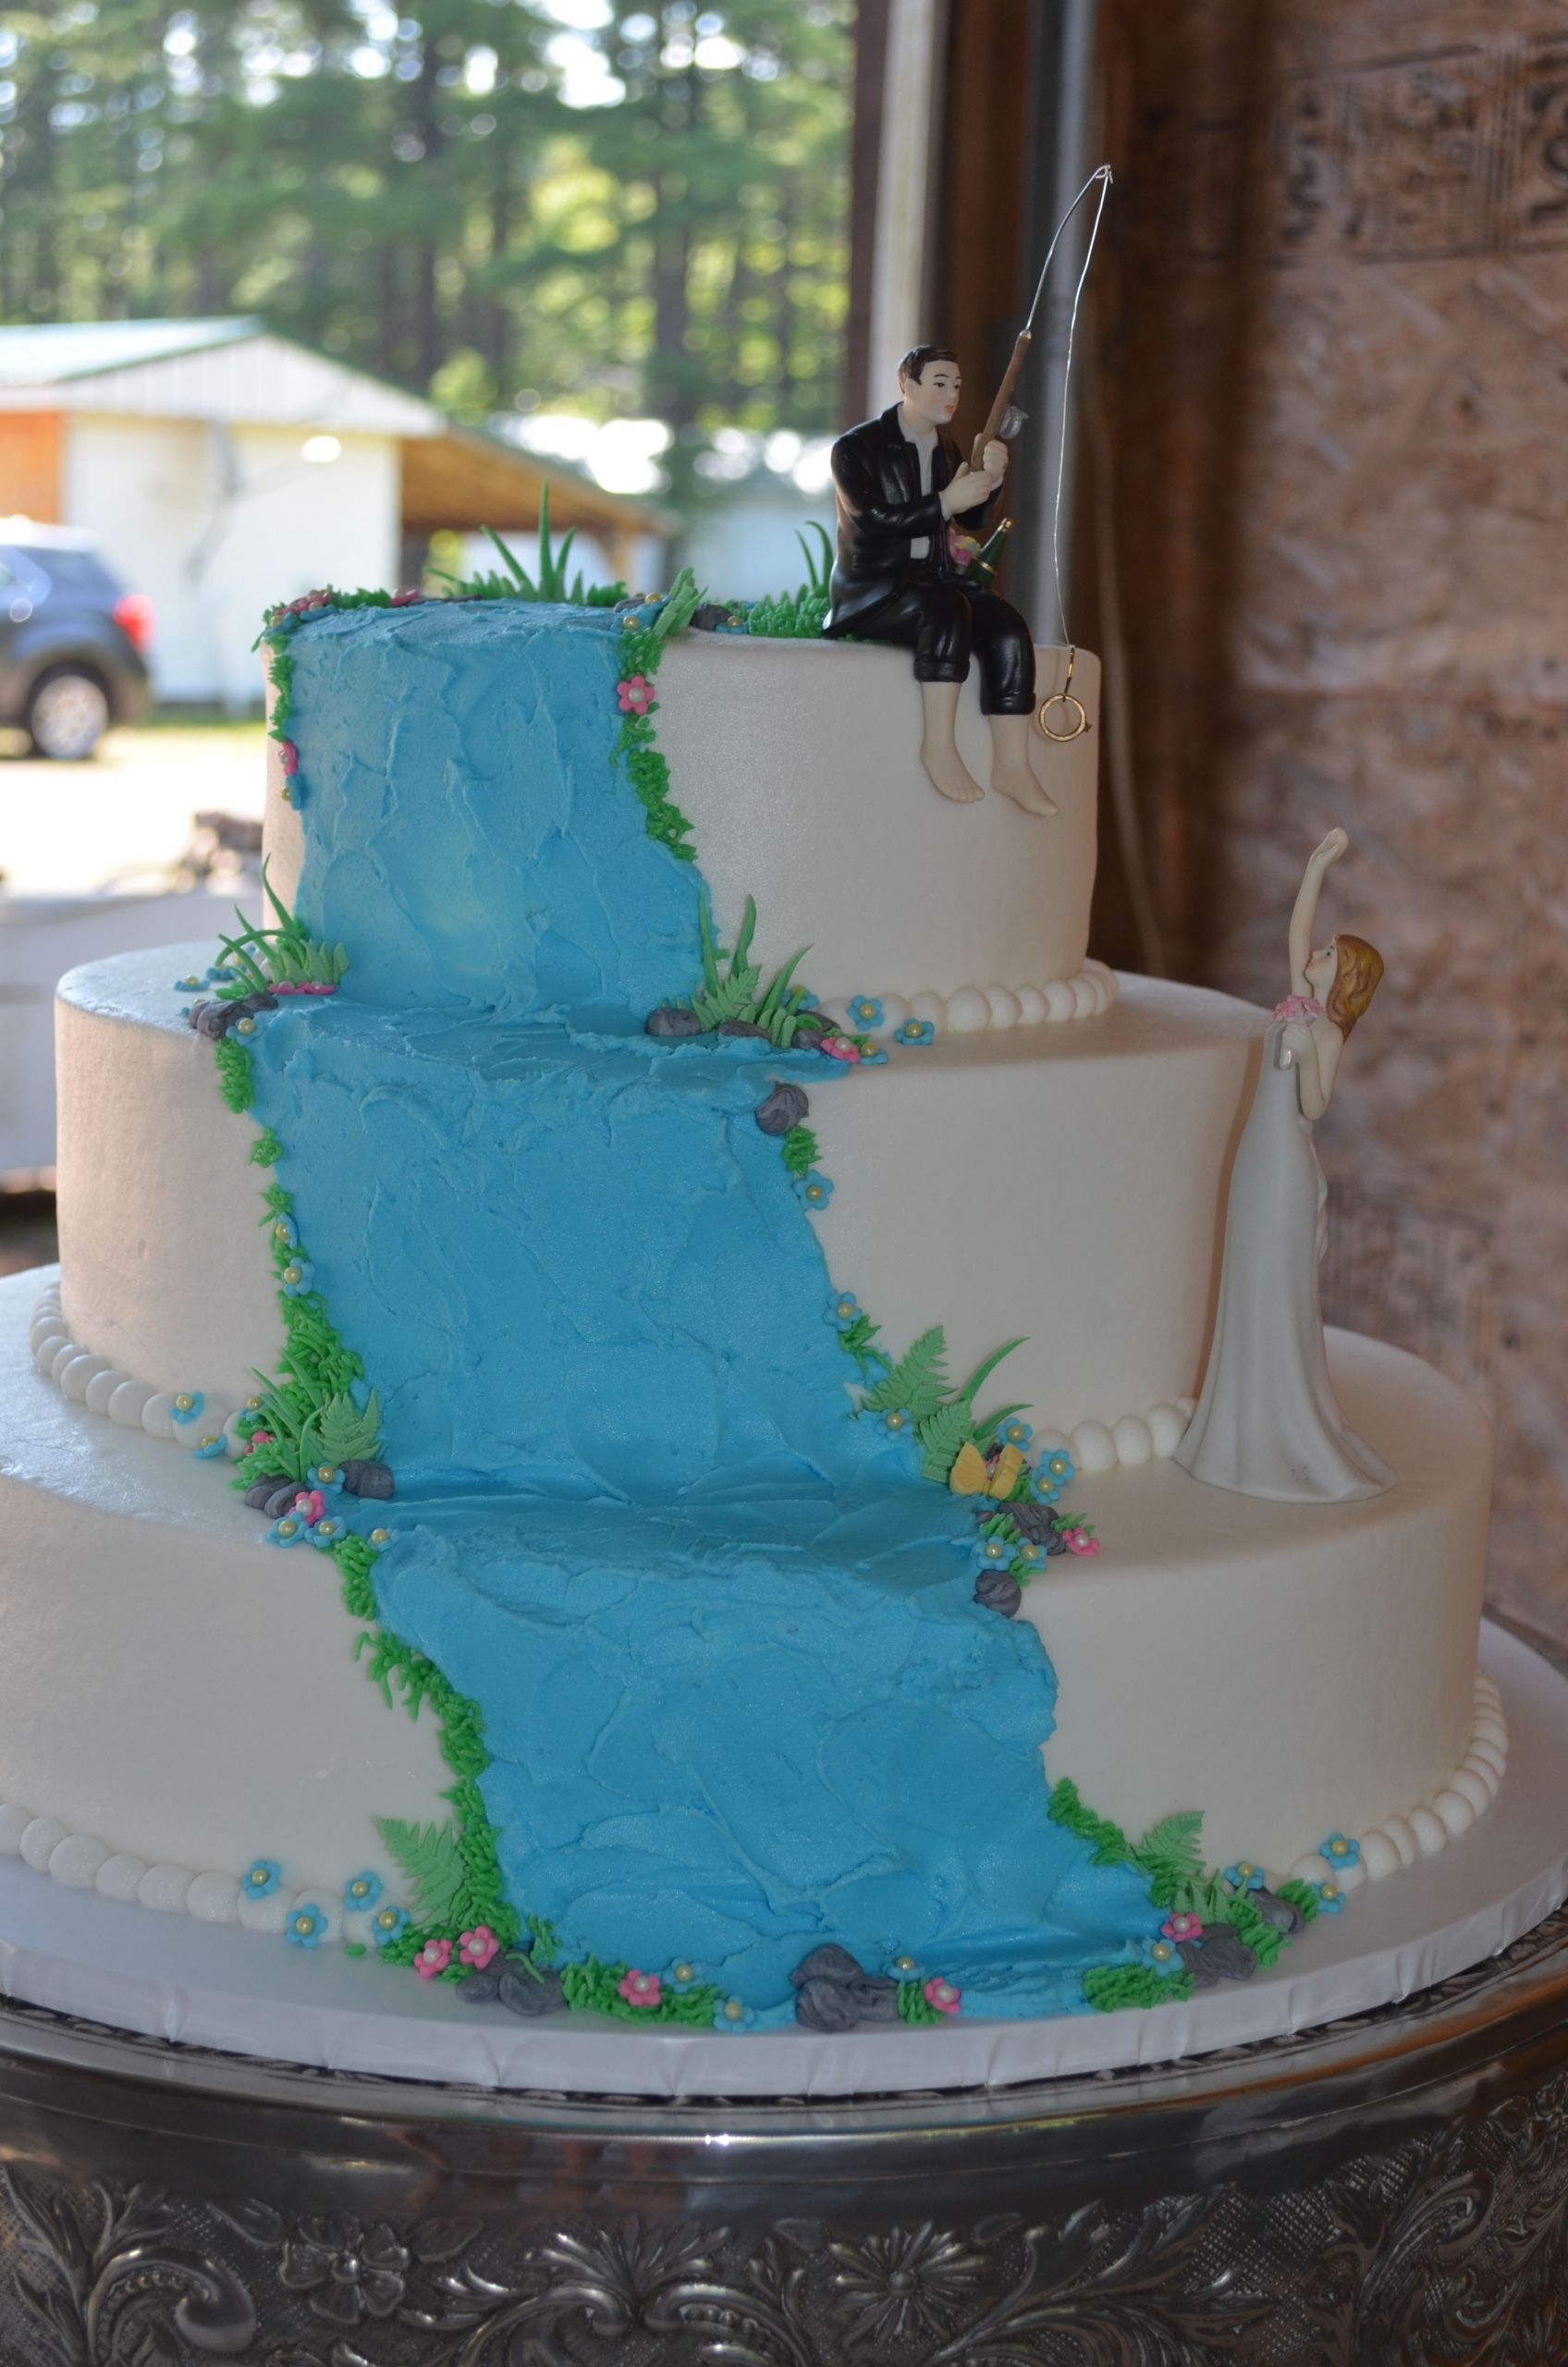 Waterfall Wedding Cakes
 Waterfall Wedding Cake Cake Ideas and Designs